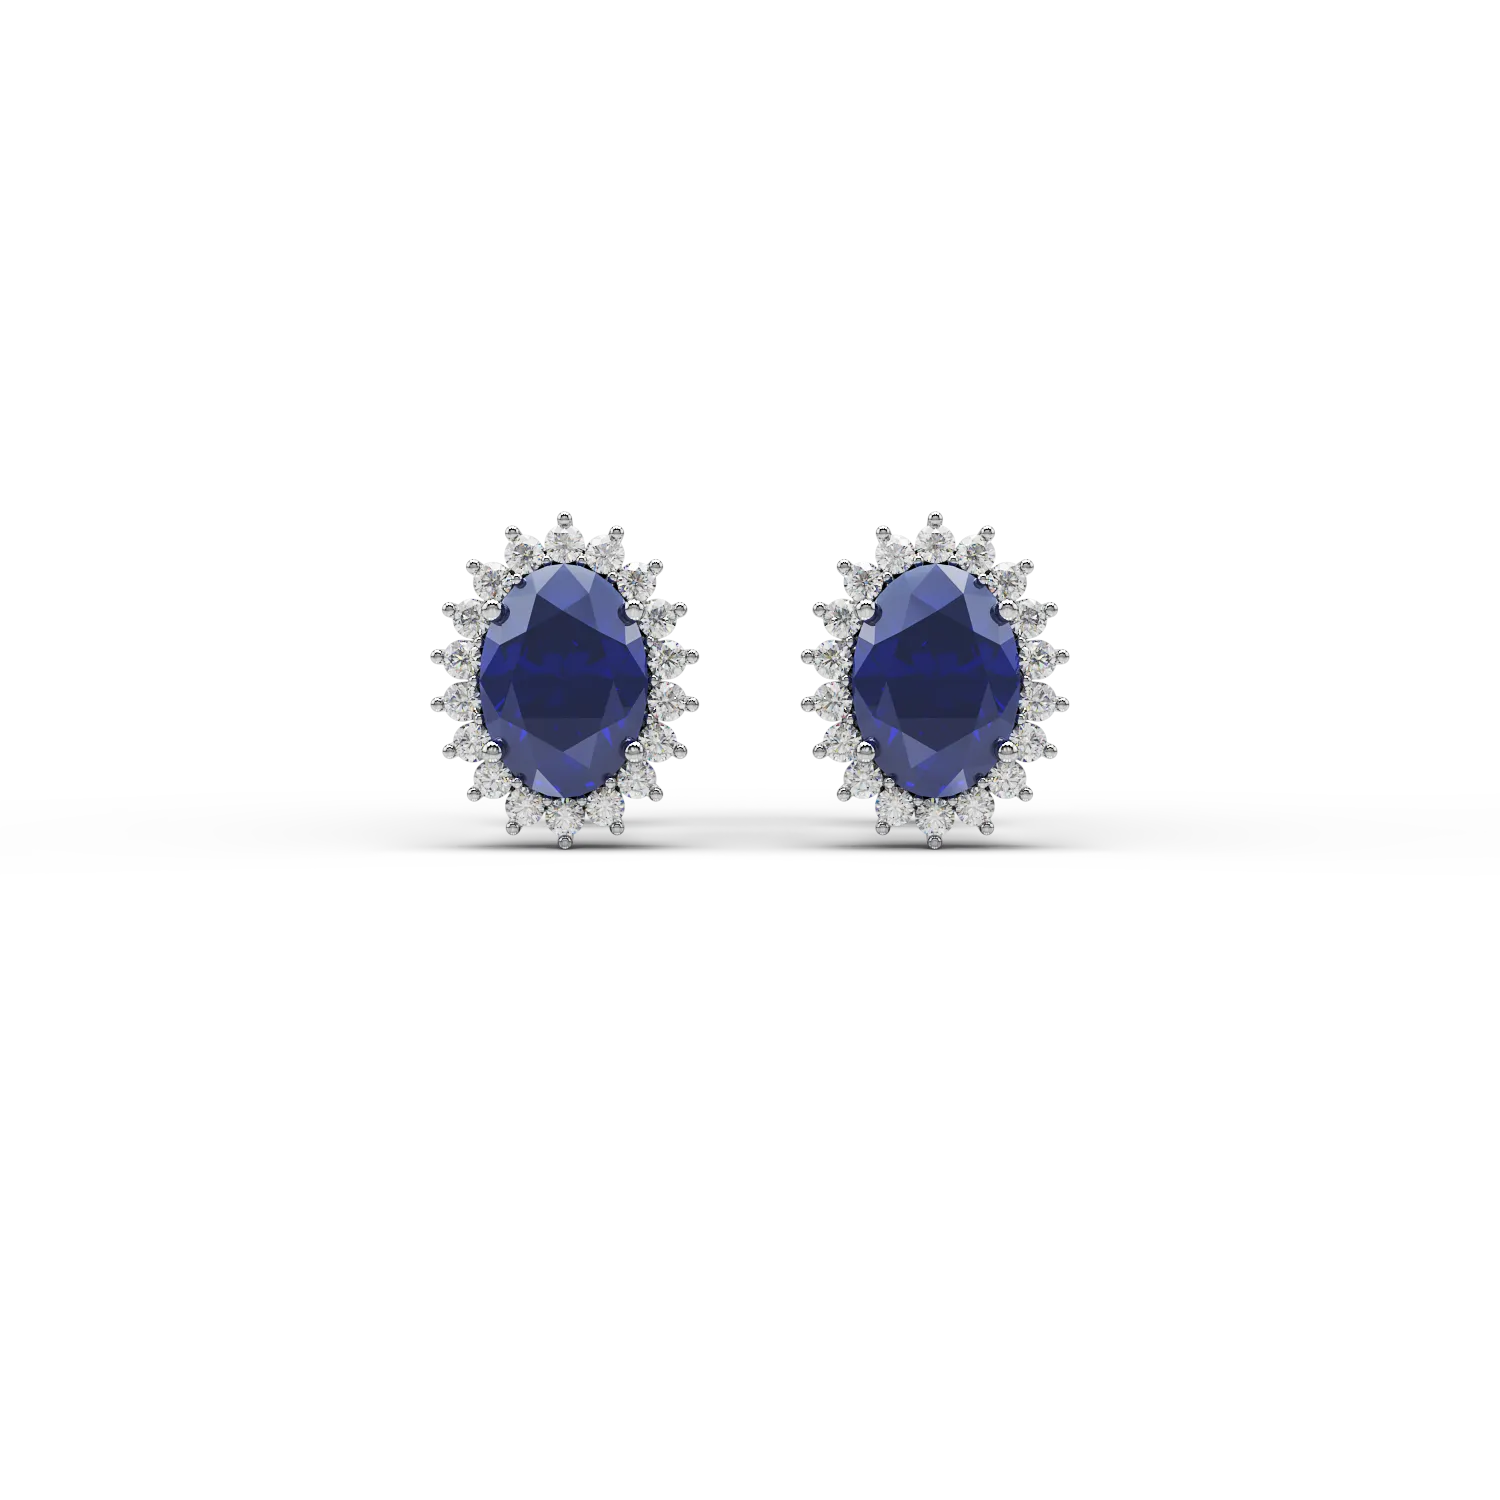 14K white gold earrings with 2.83ct treated sapphires and 0.44ct diamonds